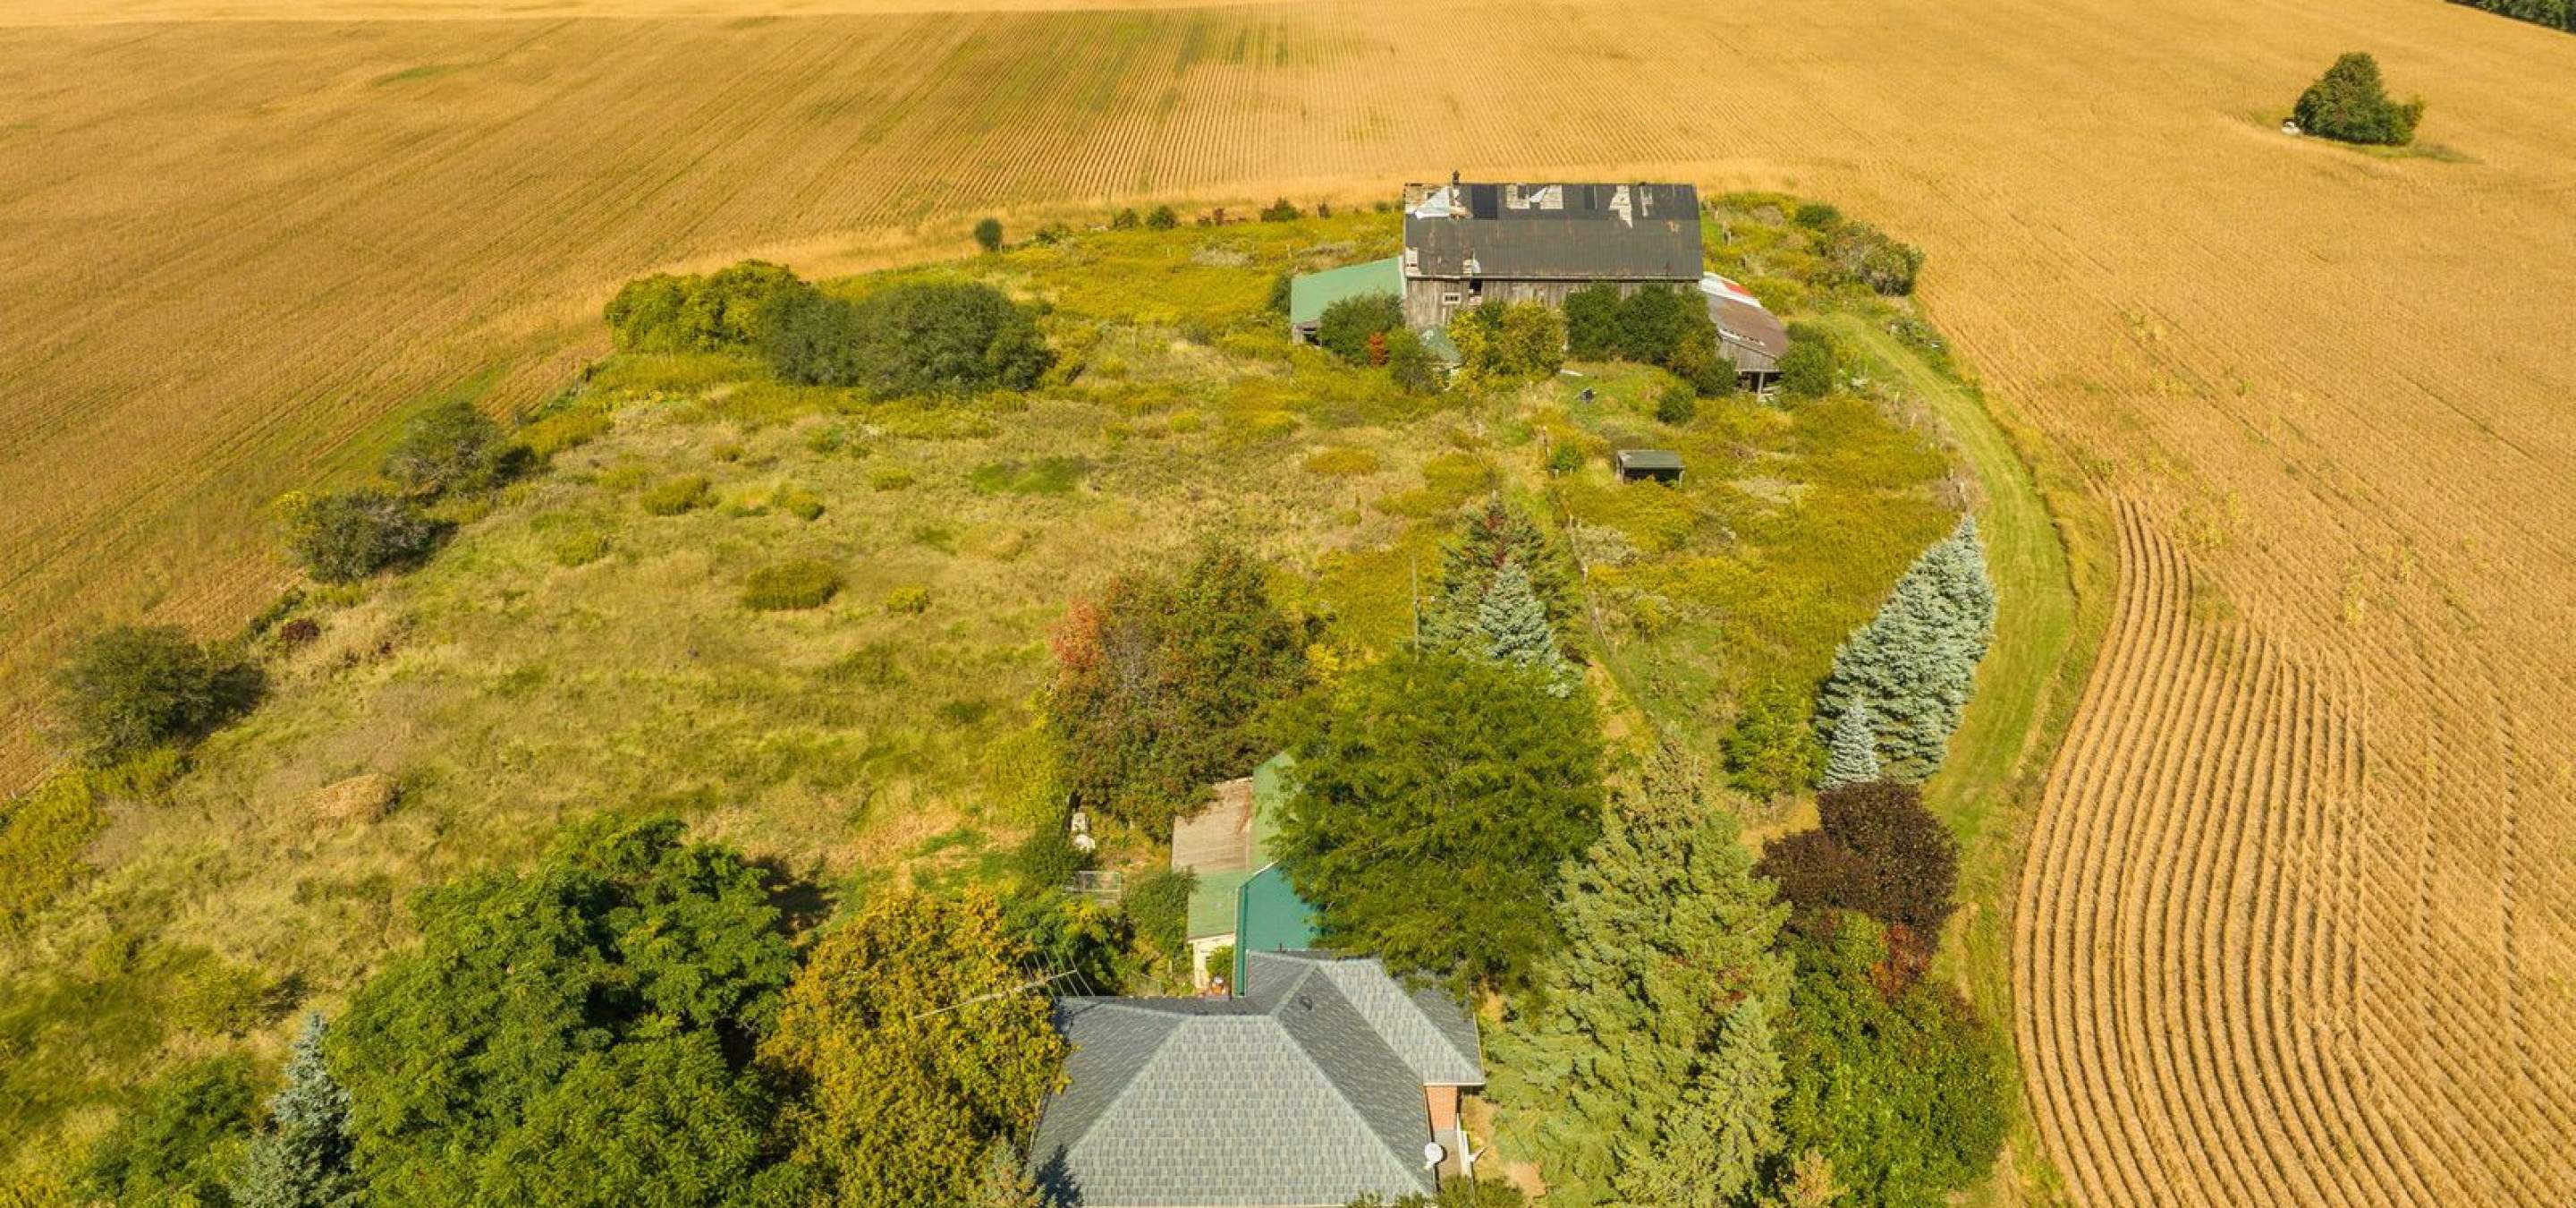 Drone shot of well treed lot with old barn and farmhouse in foreground with property surrounded by farmland.